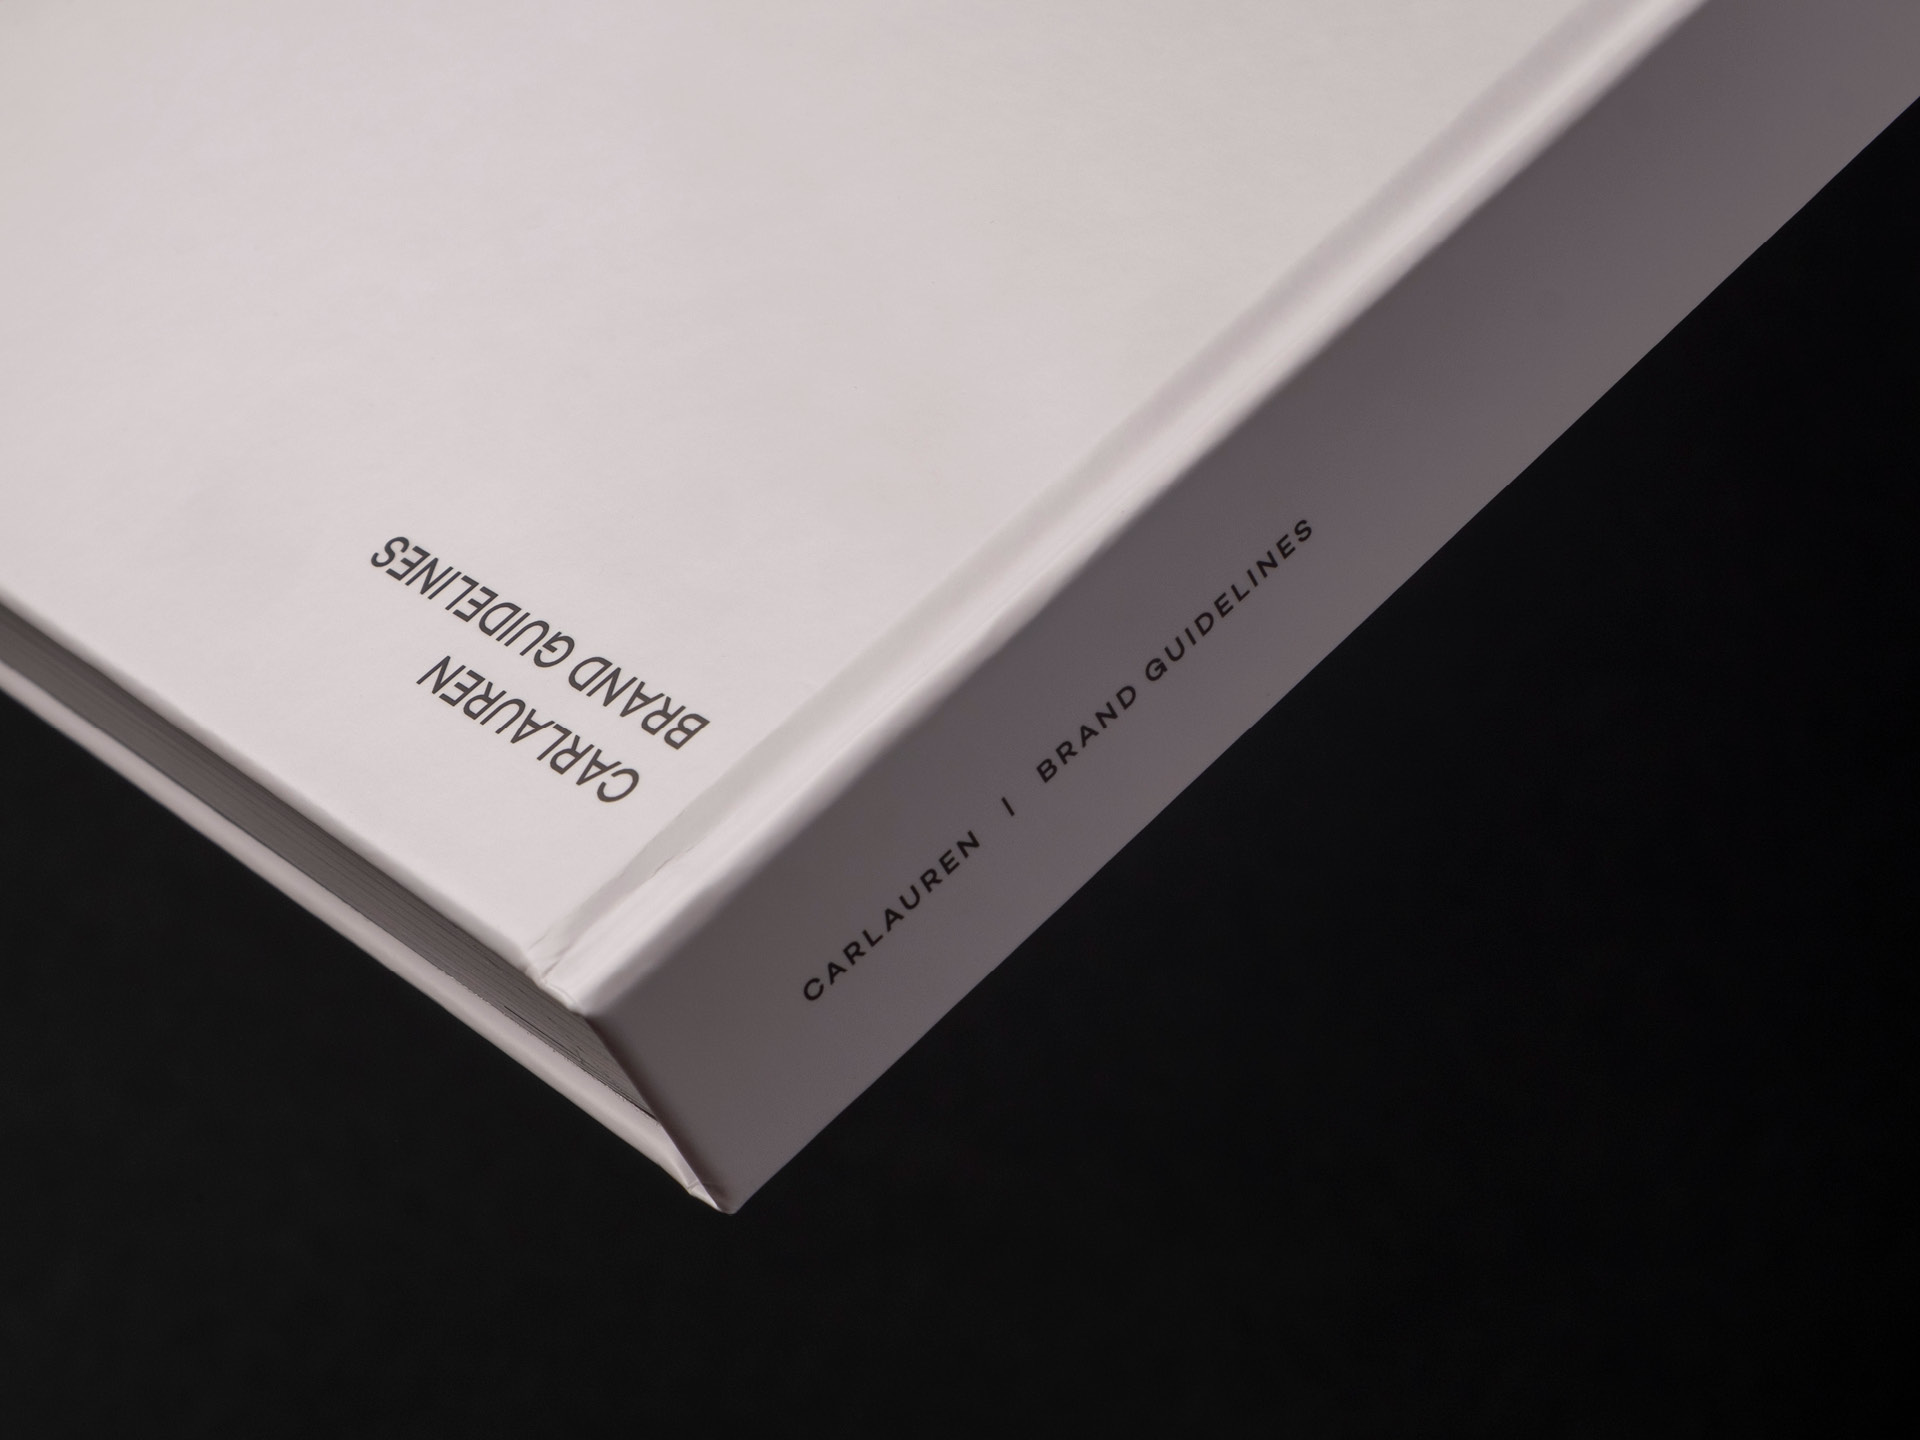 A detailed shot of the Carlauren brand guidelines cover and spine